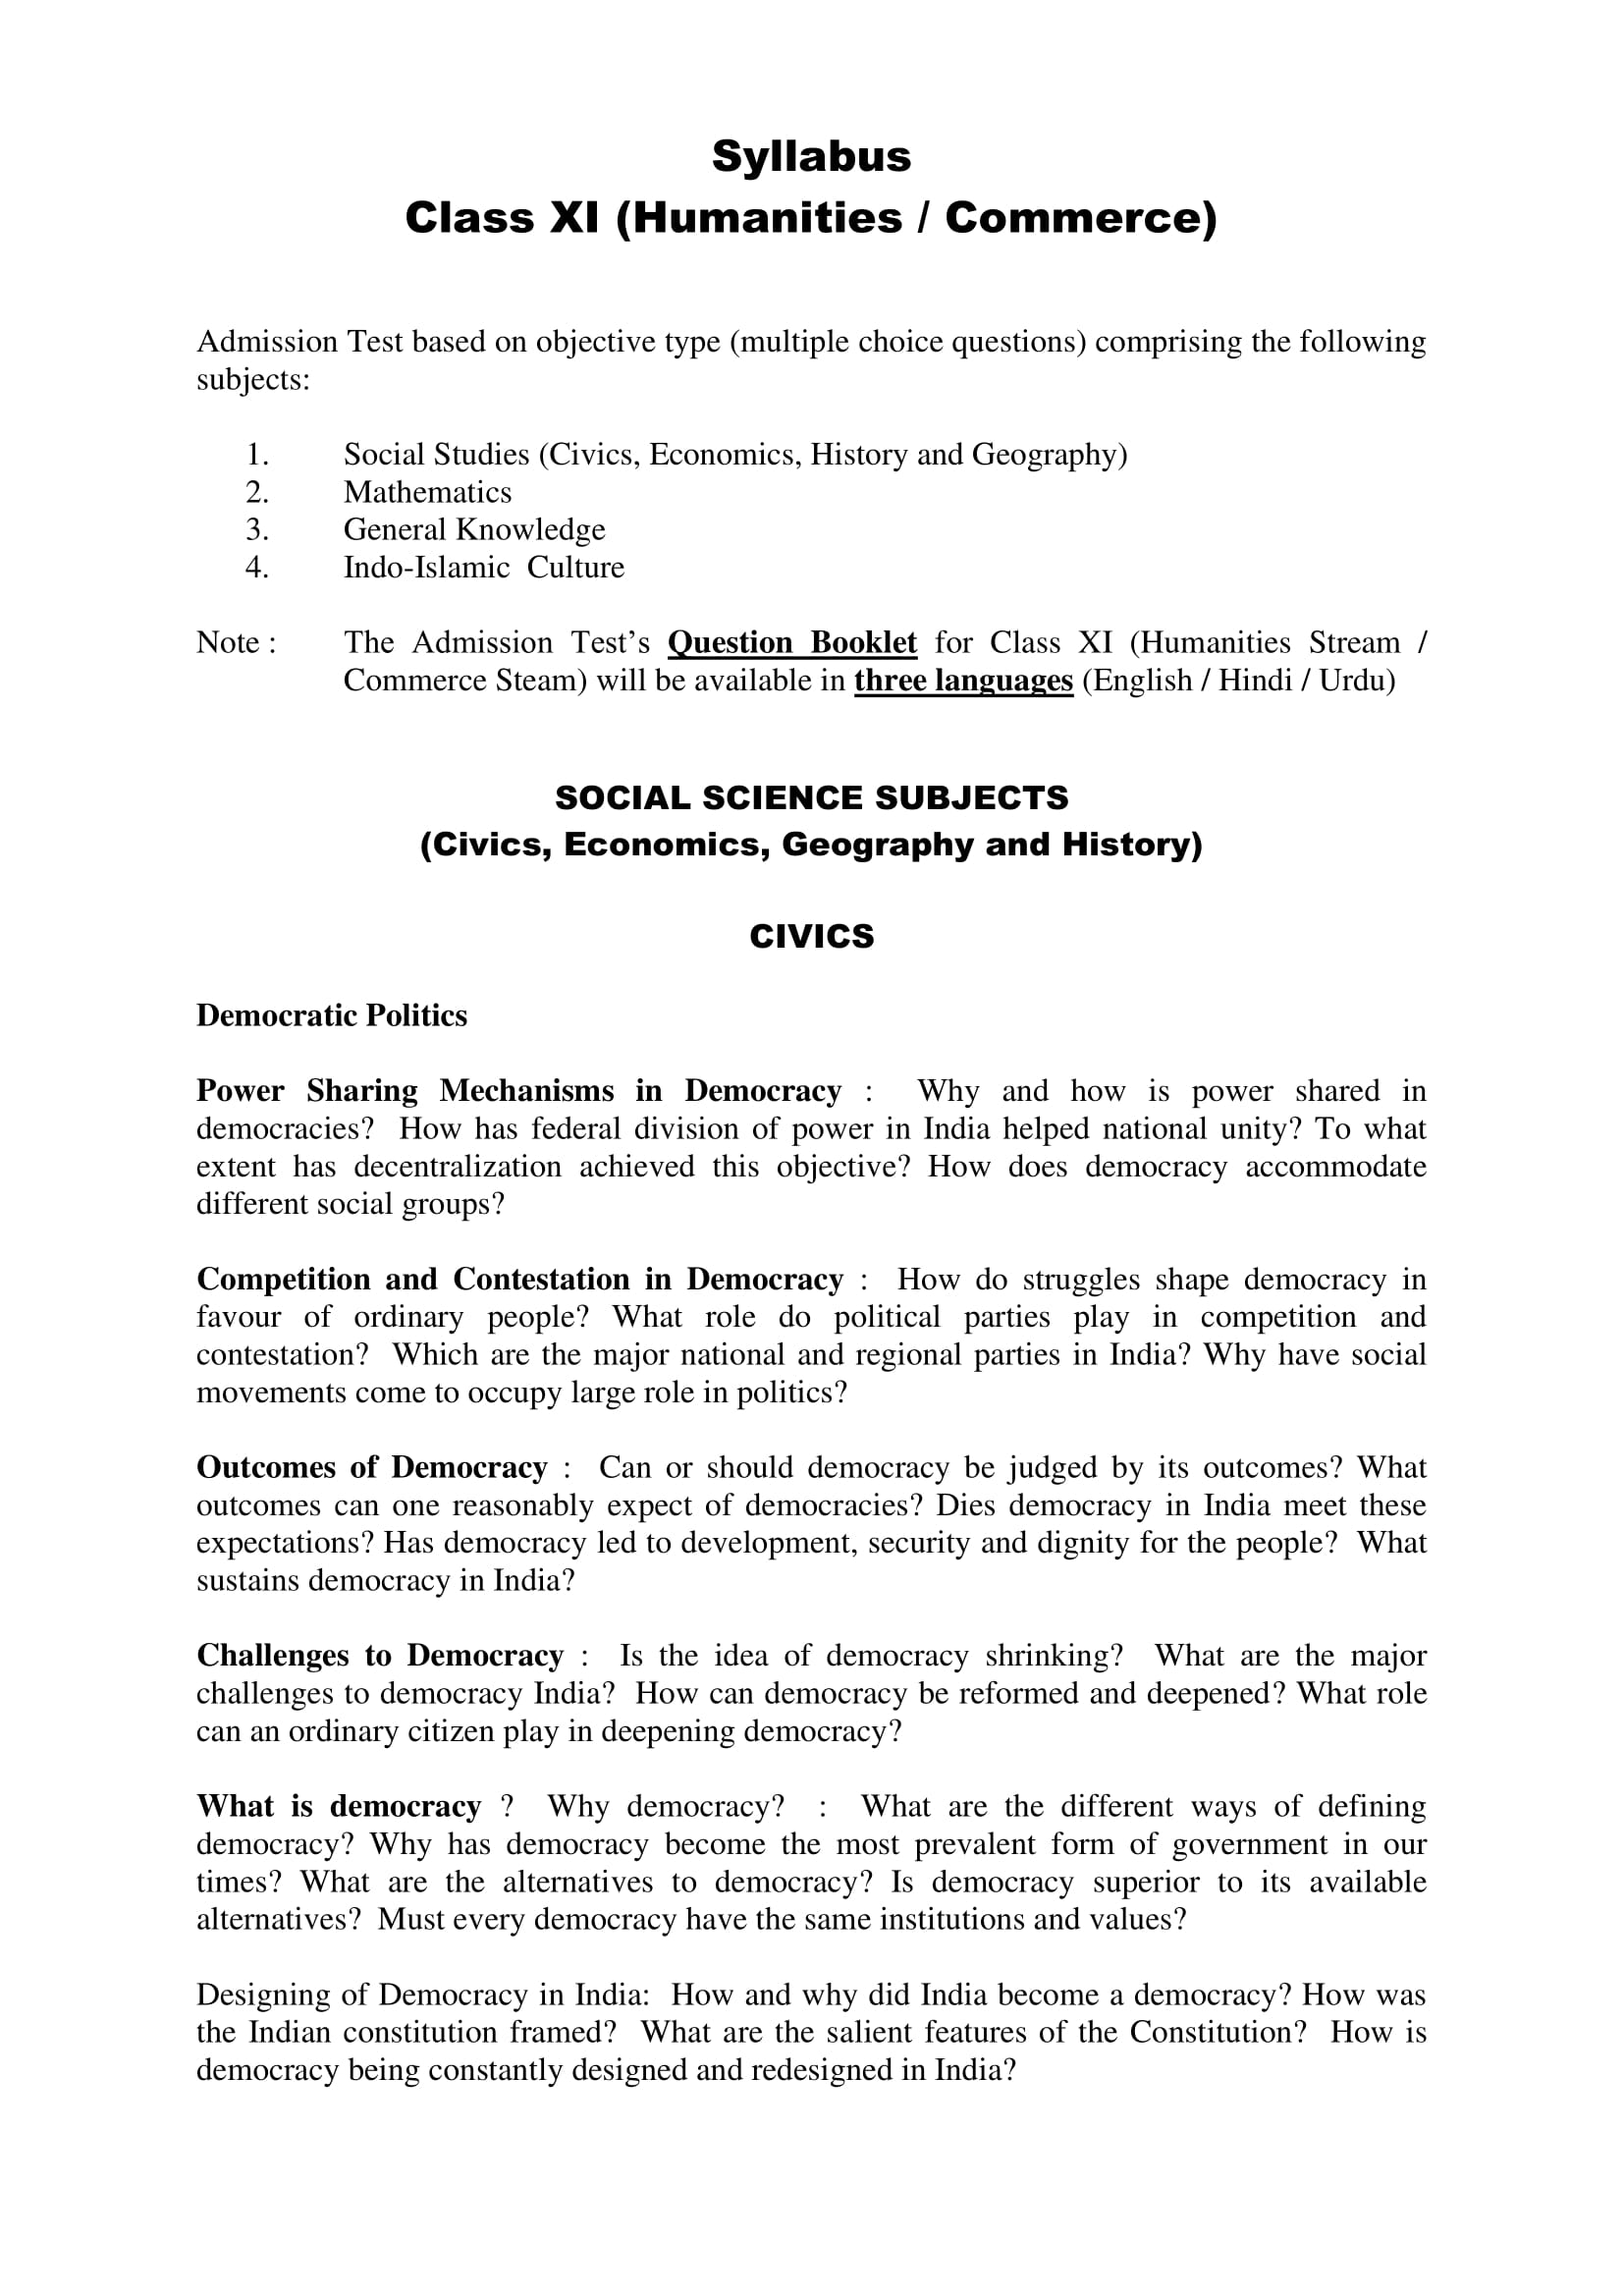 AMU Entrance Exam Syllabus for Class XI Humanities Commerce Stream - Page 1